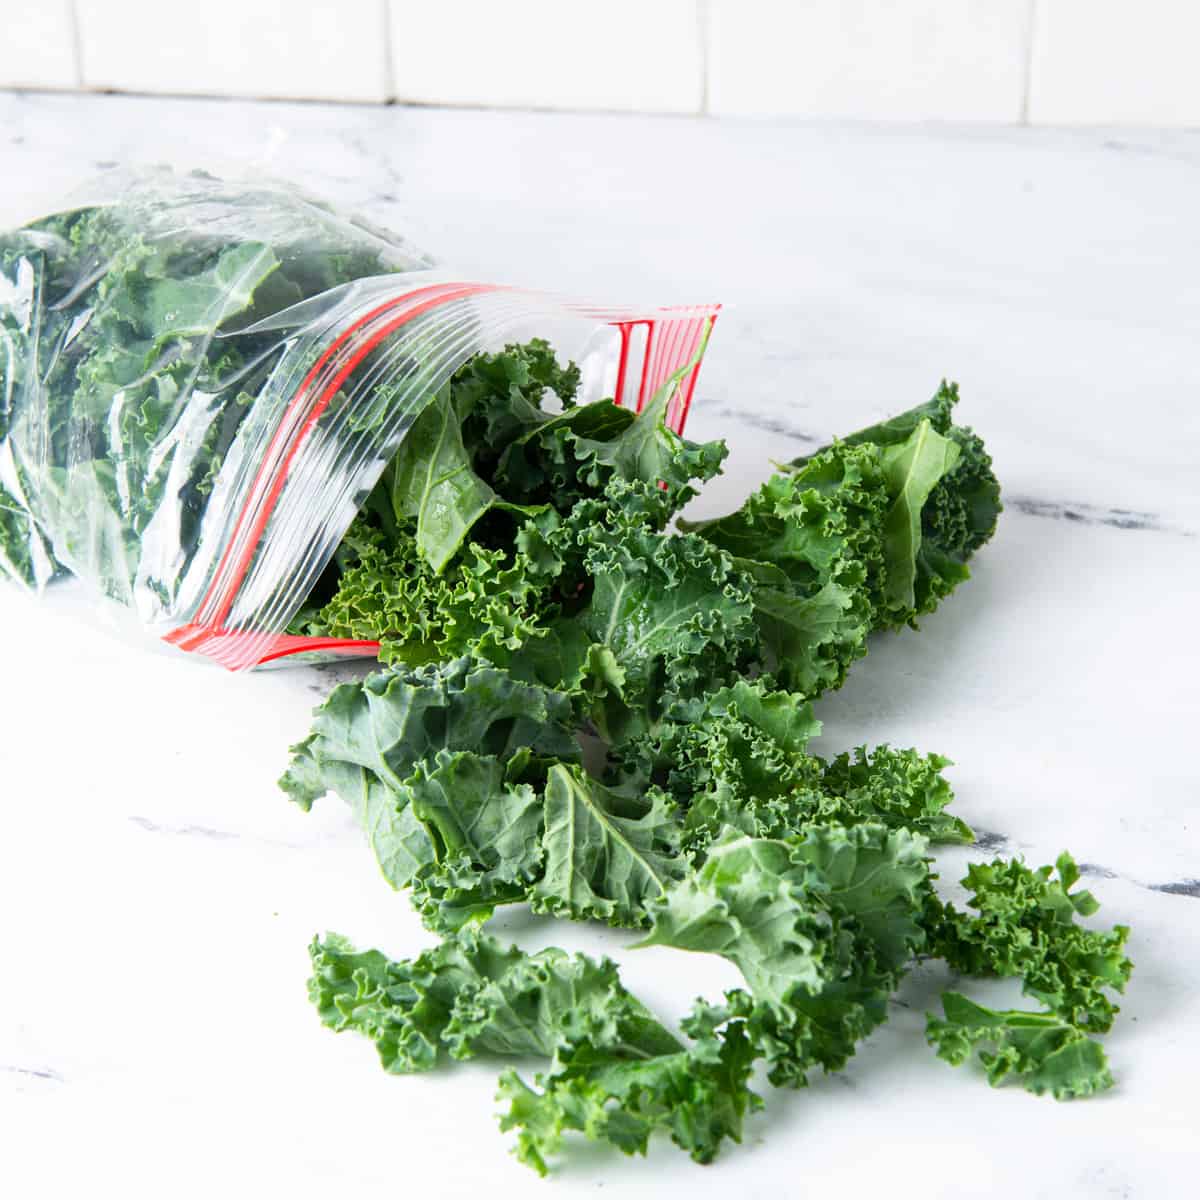 Kale in ziplock bag on a kitchen counter.